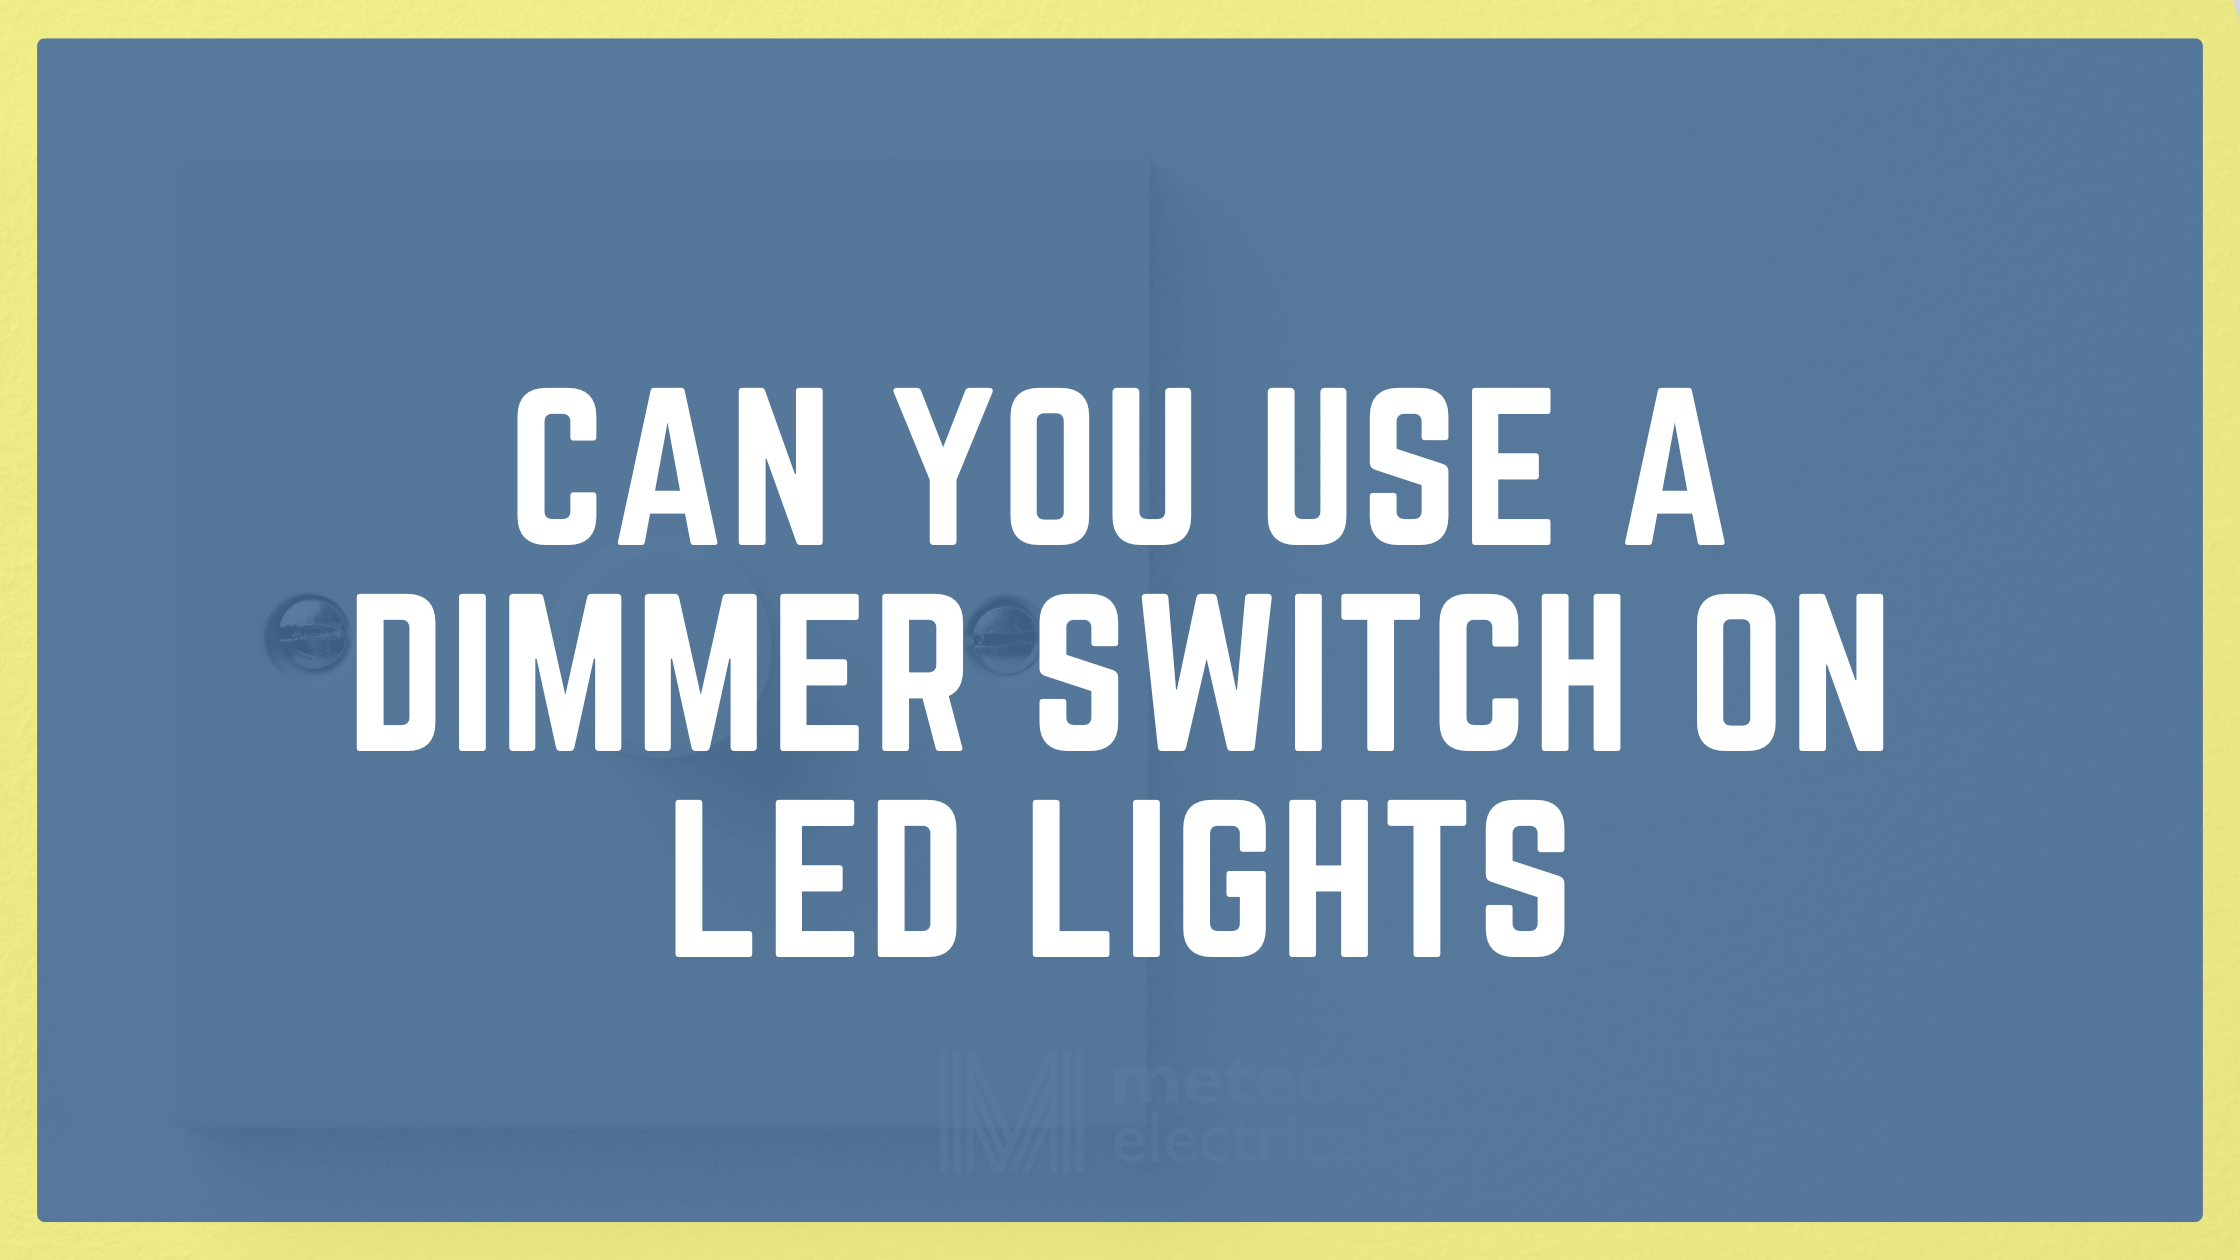 Can You Use A Dimmer Switch on LED Lights